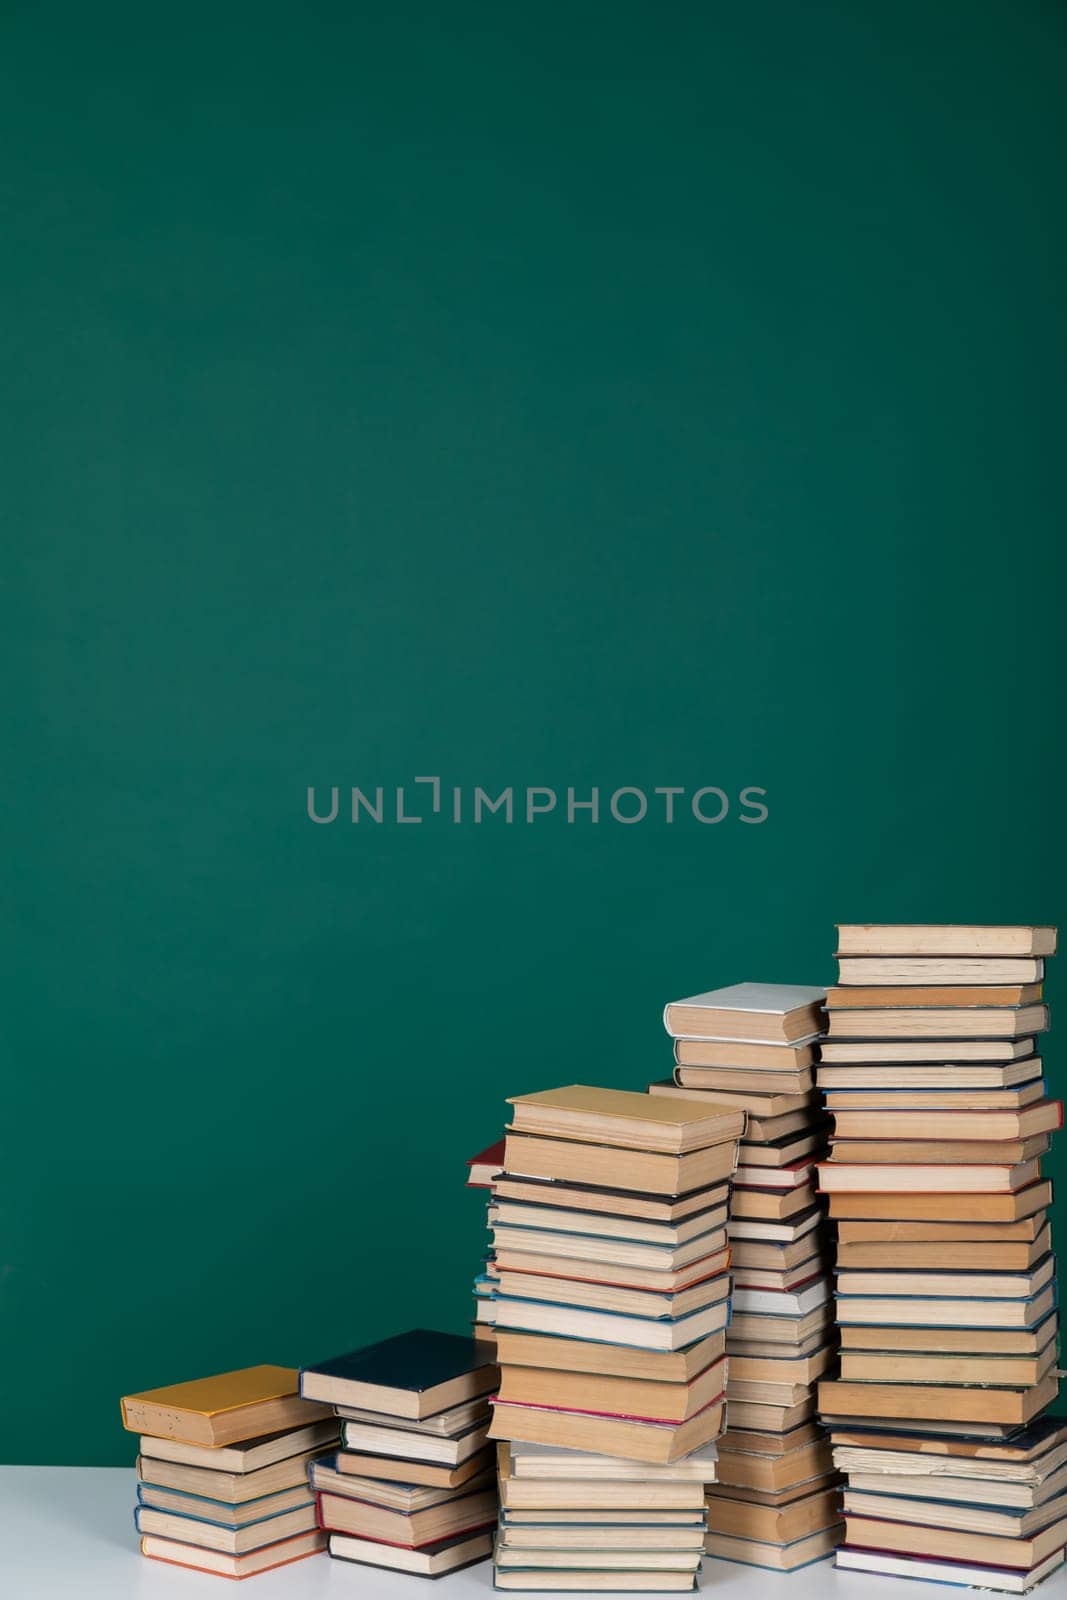 stack of books in the library on a green background training education science by Simakov